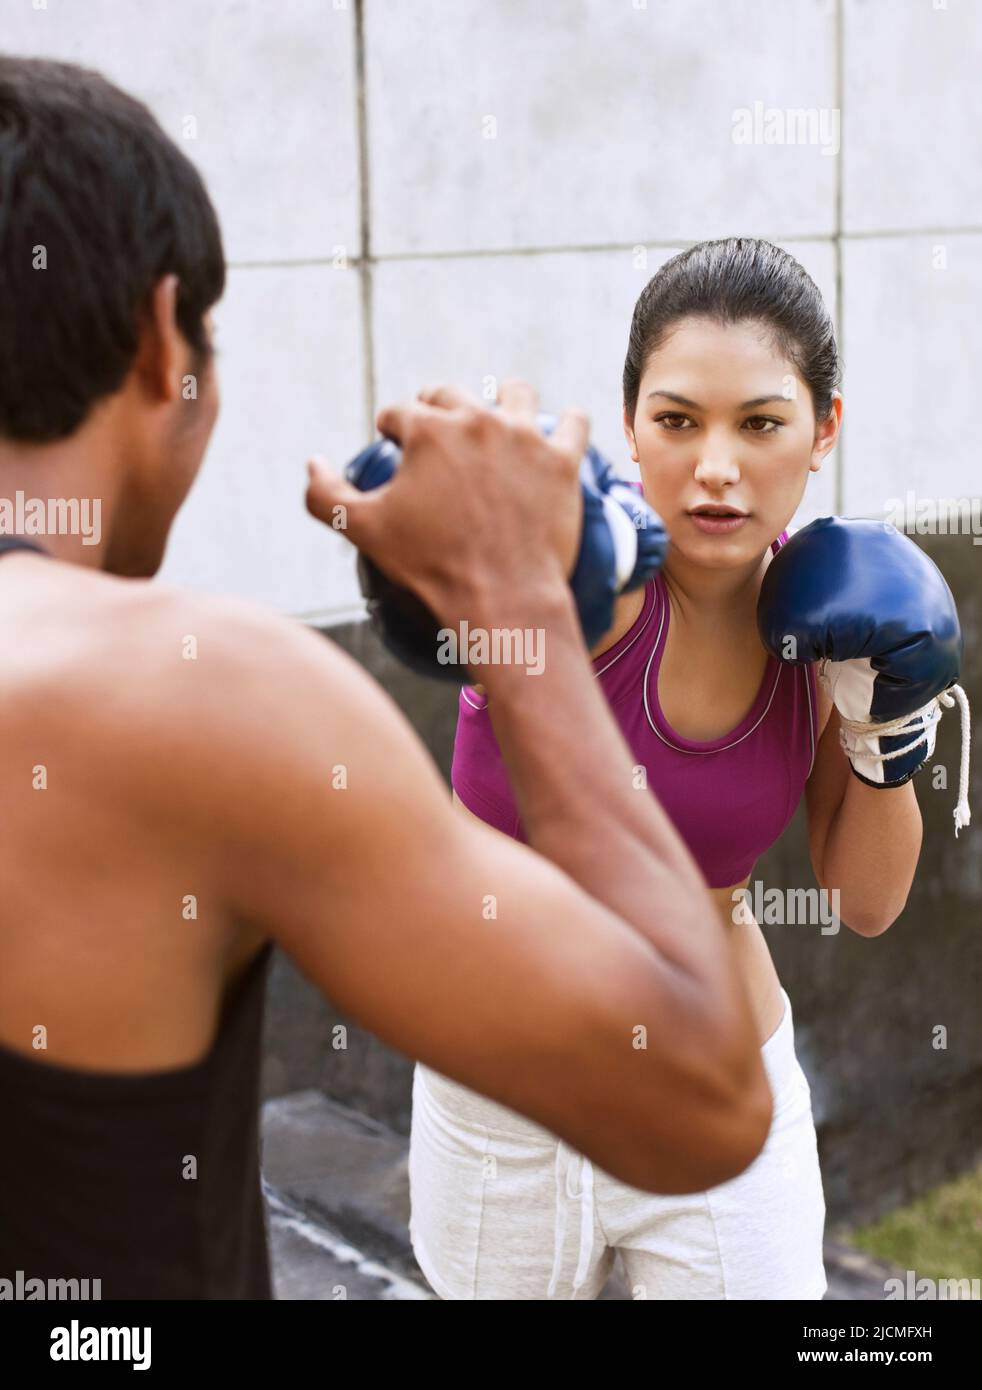 A young woman trains with a Muay Thai instructor. Phuket, Thailand. Stock Photo